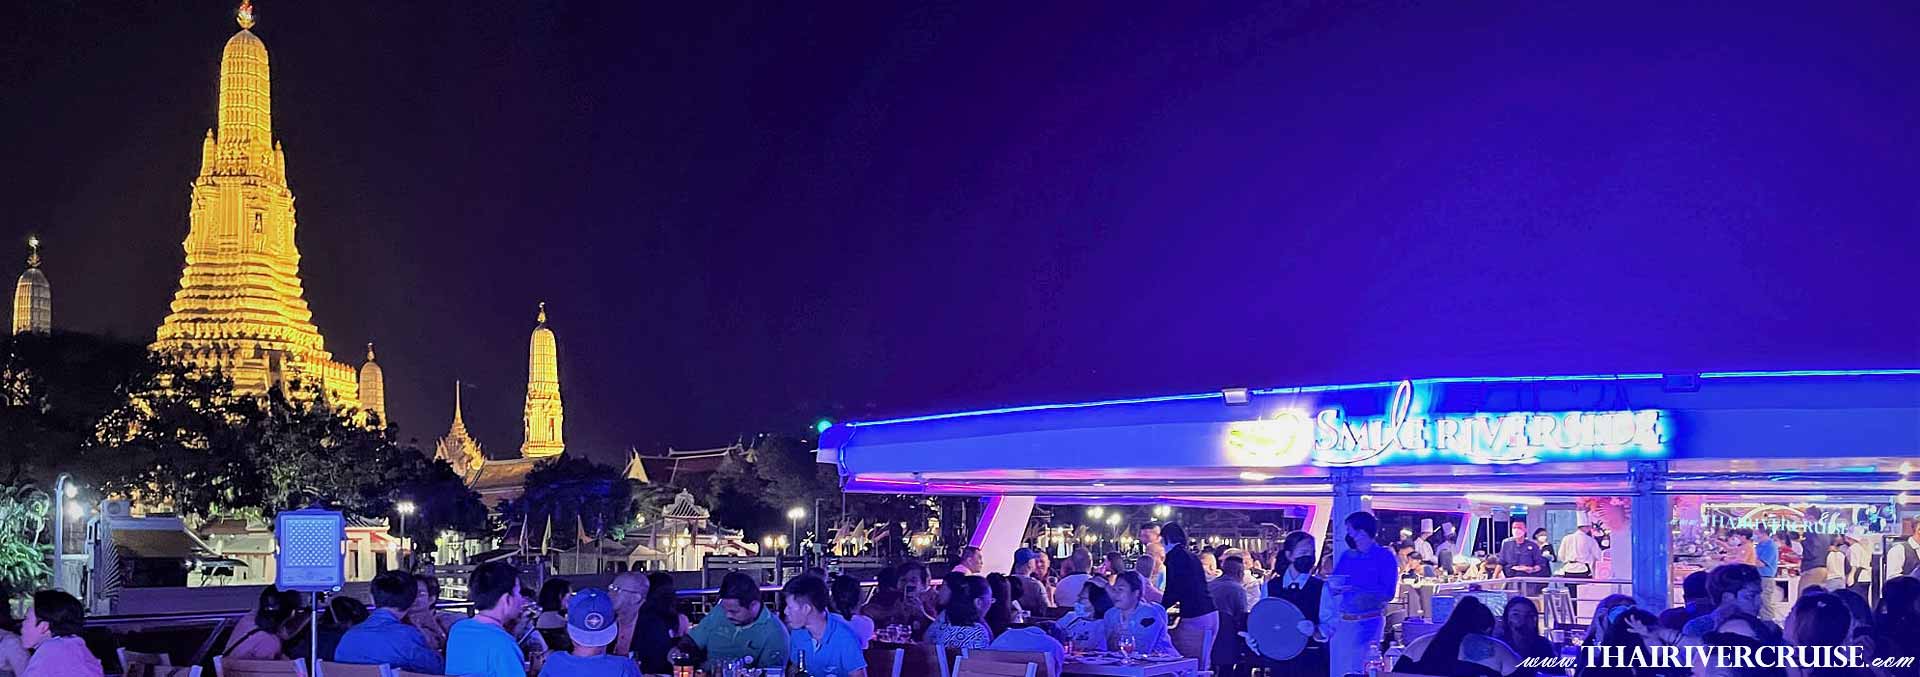 Smile Riverside Cruise Dinner Bangkok Bangkok Dinner Cruise from Iconsiam  Promotion Discount Cheap Price Ticket Price Offers Booking Online 